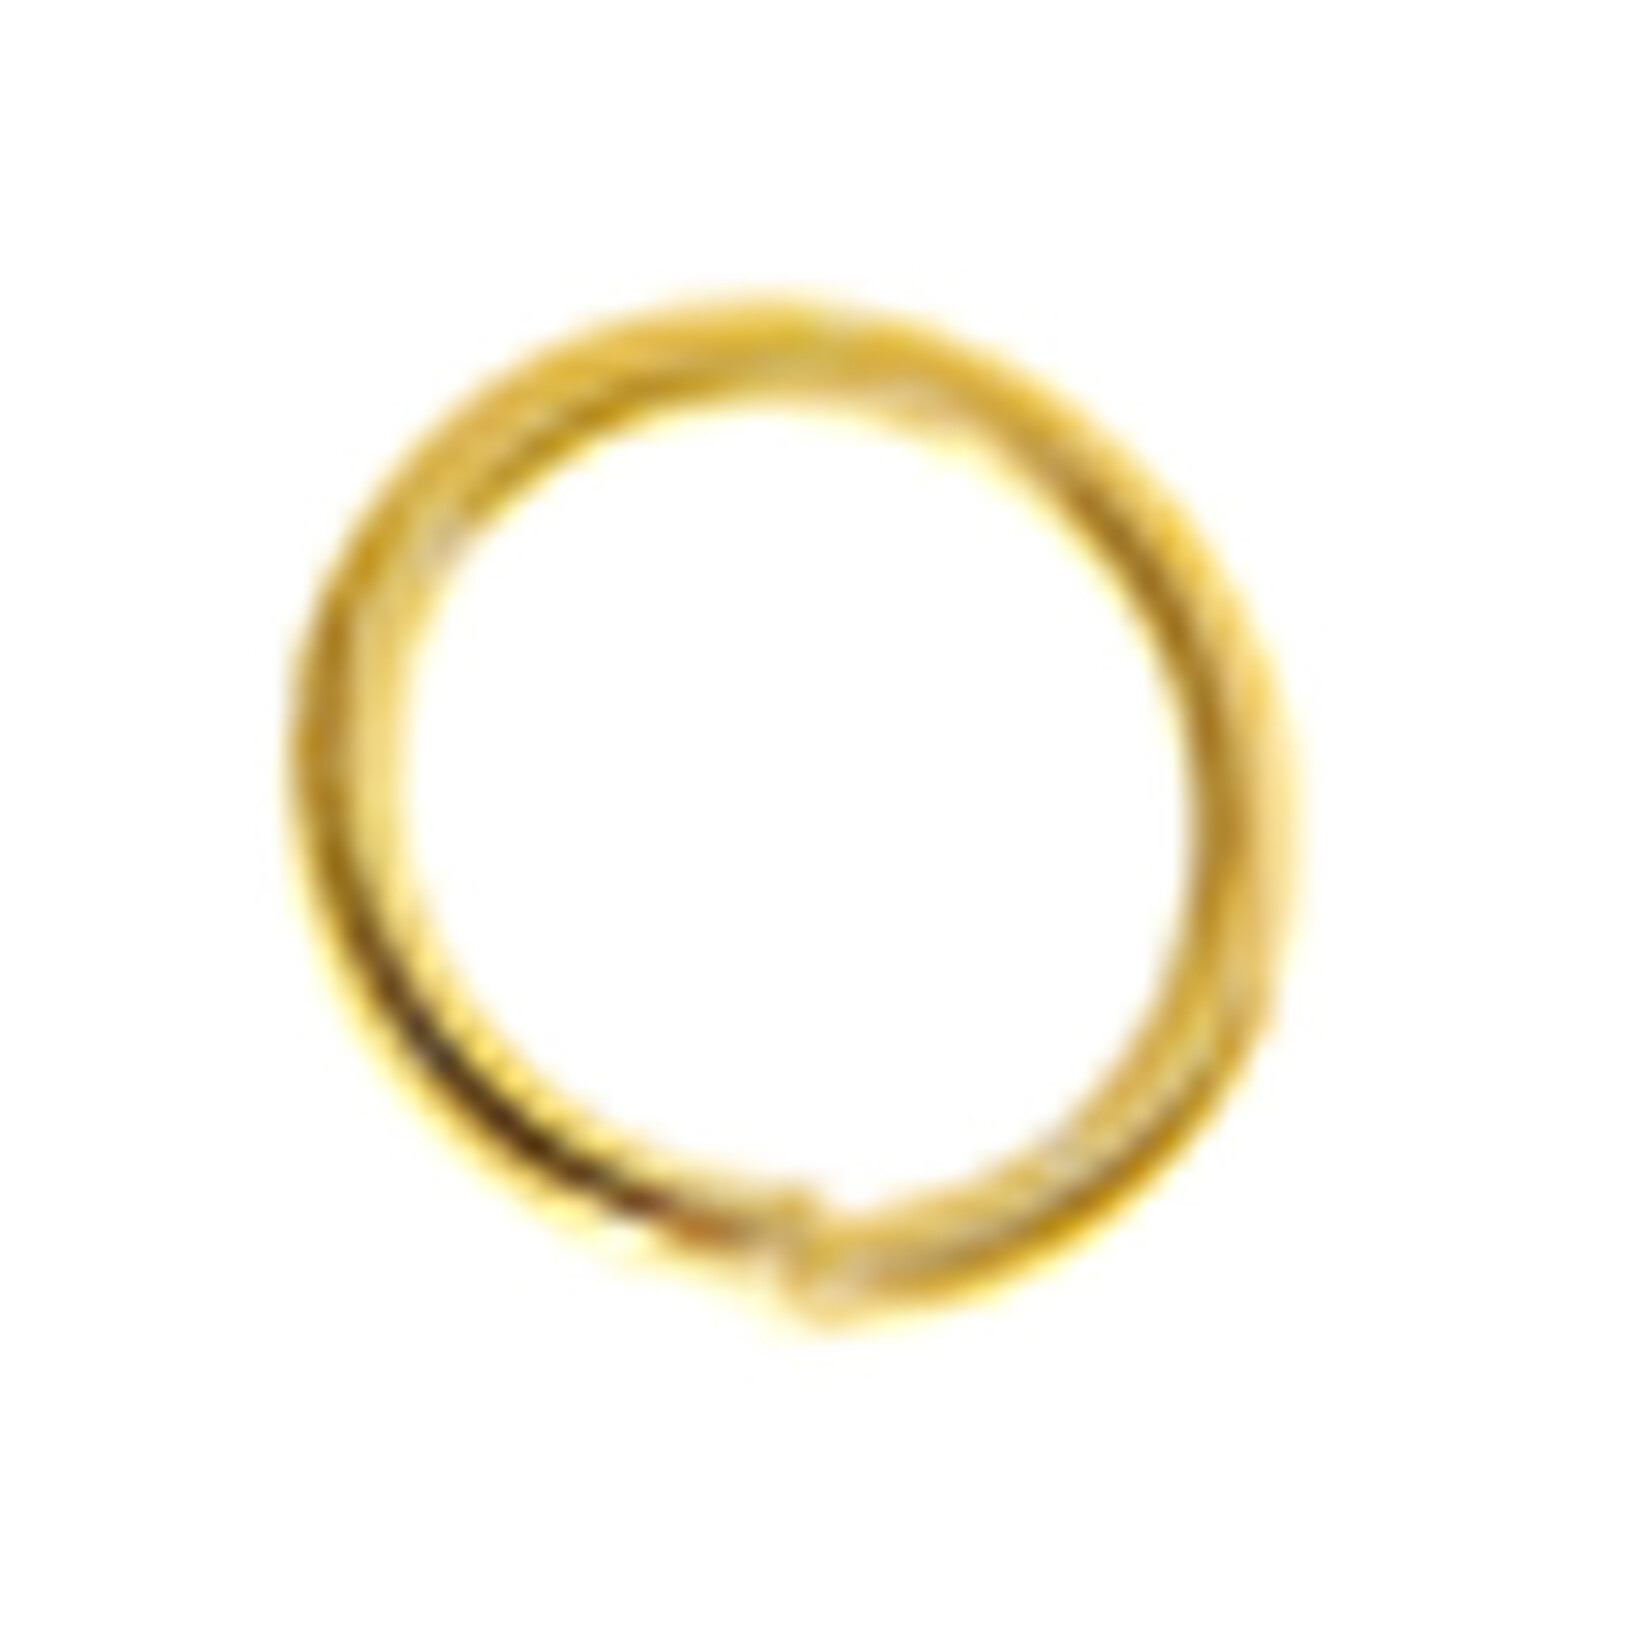 Jump Ring 2mm Gold 100g